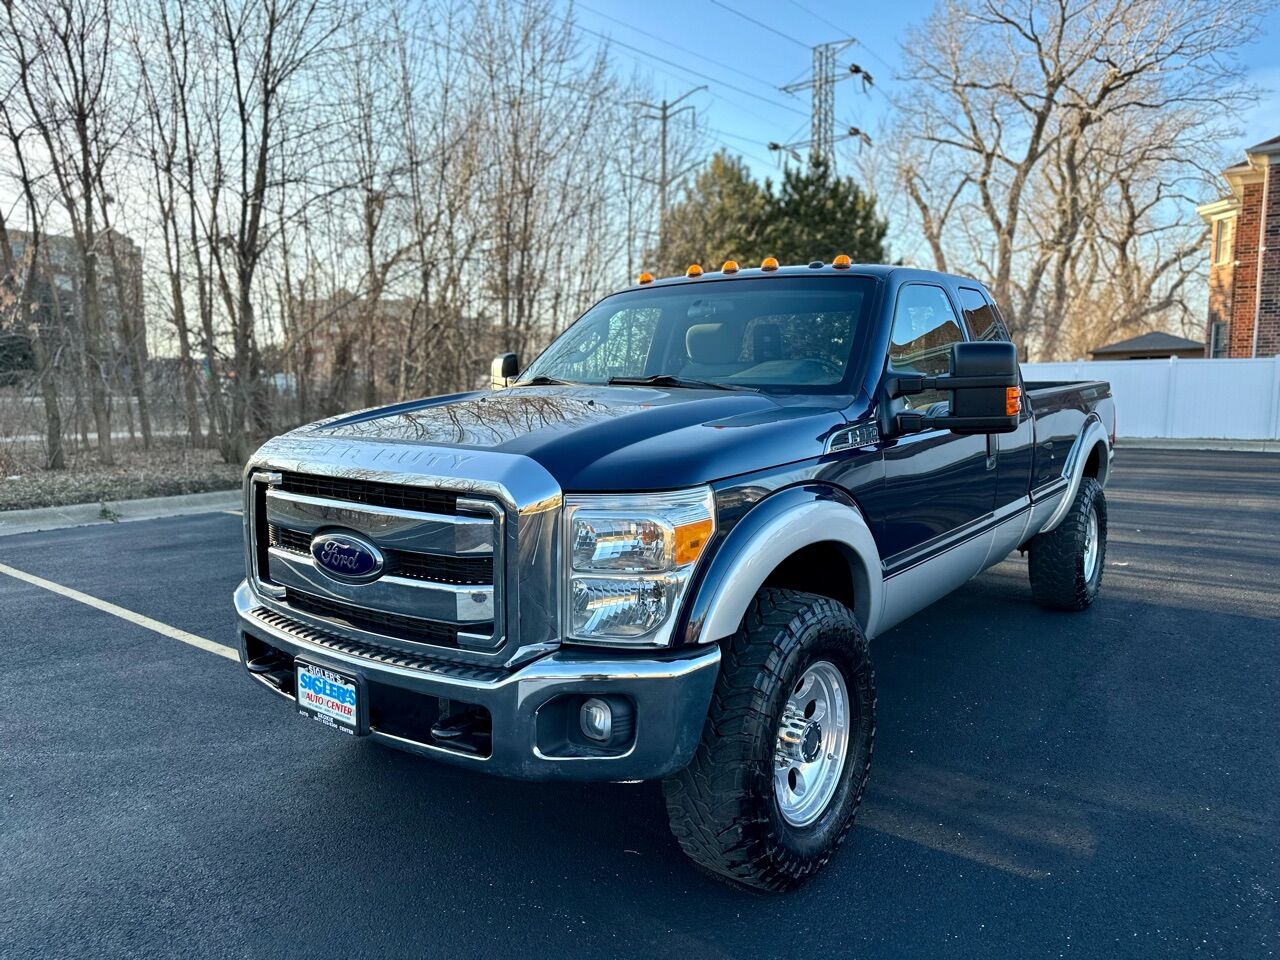 2014 Ford F-350 Super Duty For Sale - Carsforsale.com®